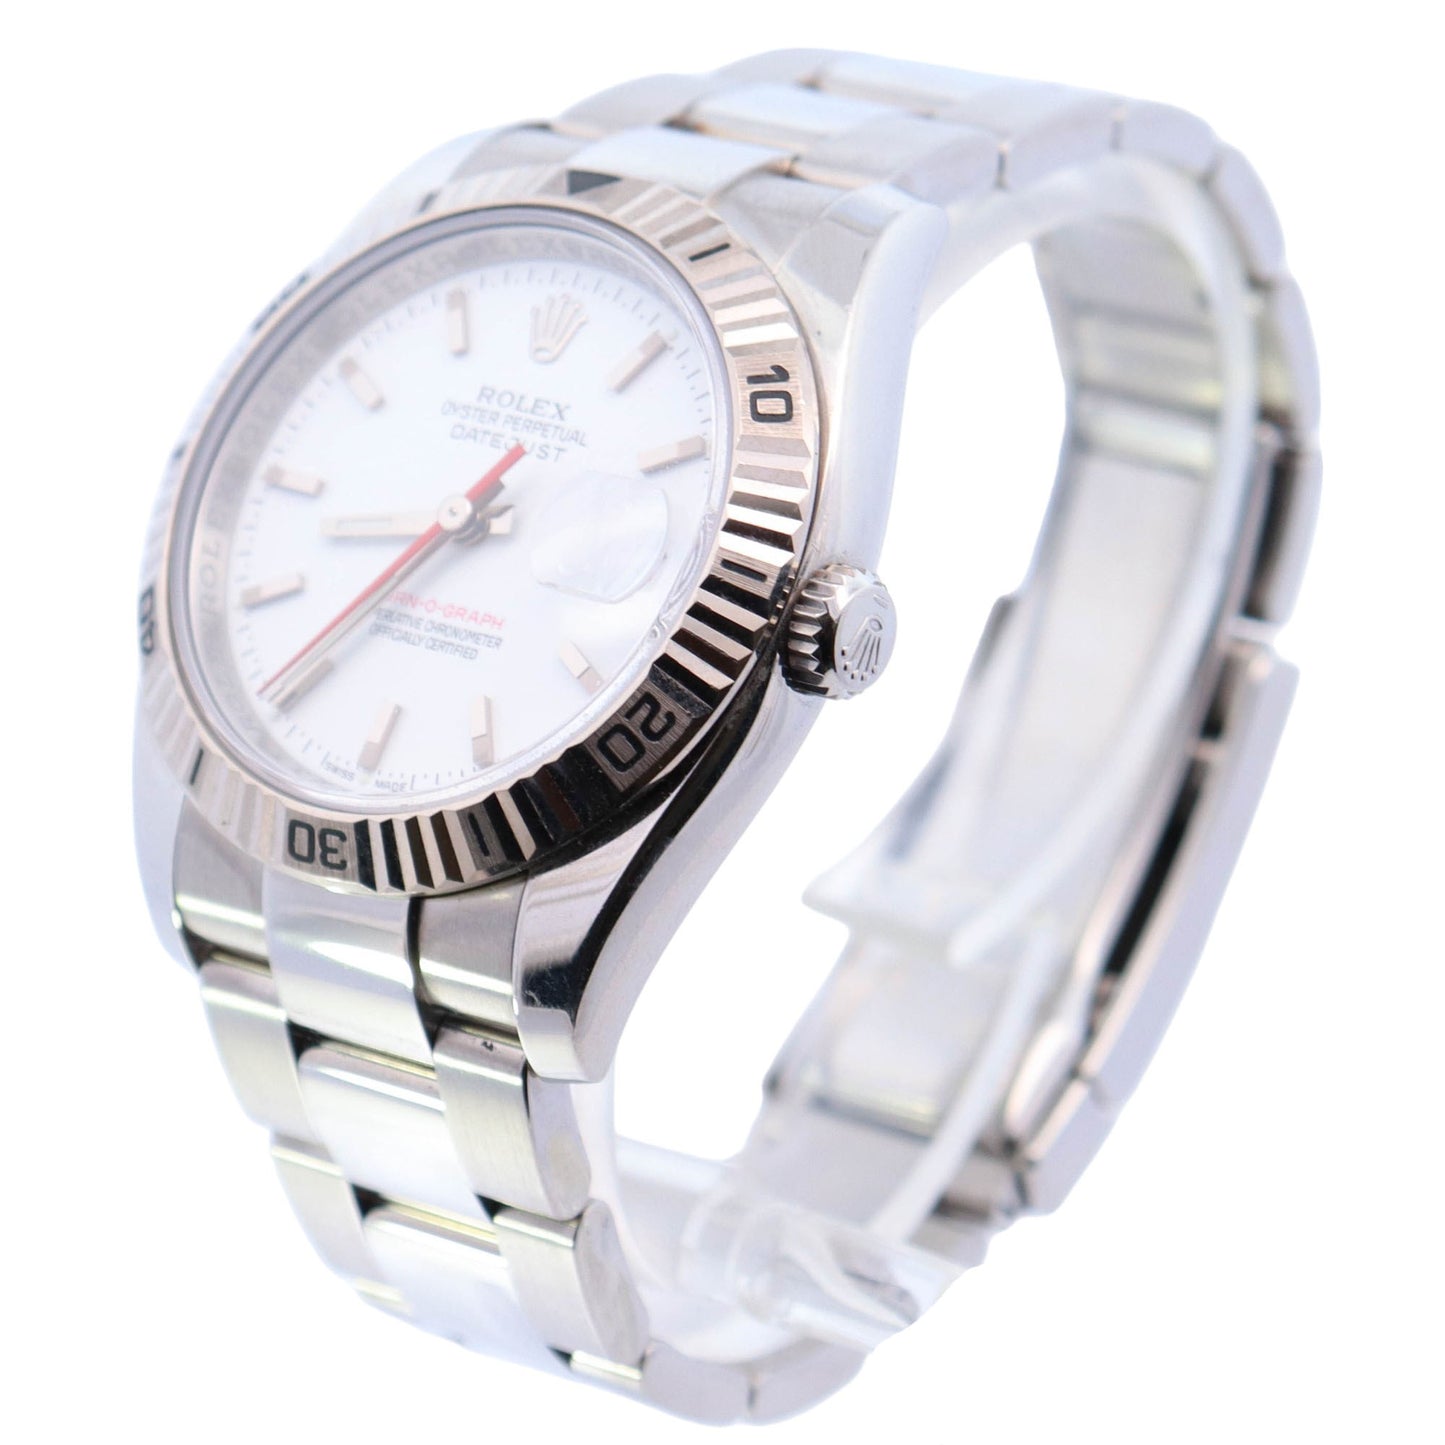 Rolex Datejust Turn-O-Graph Stainless Steel 36mm White Stick Dial Watch Reference# 116264 - Happy Jewelers Fine Jewelry Lifetime Warranty